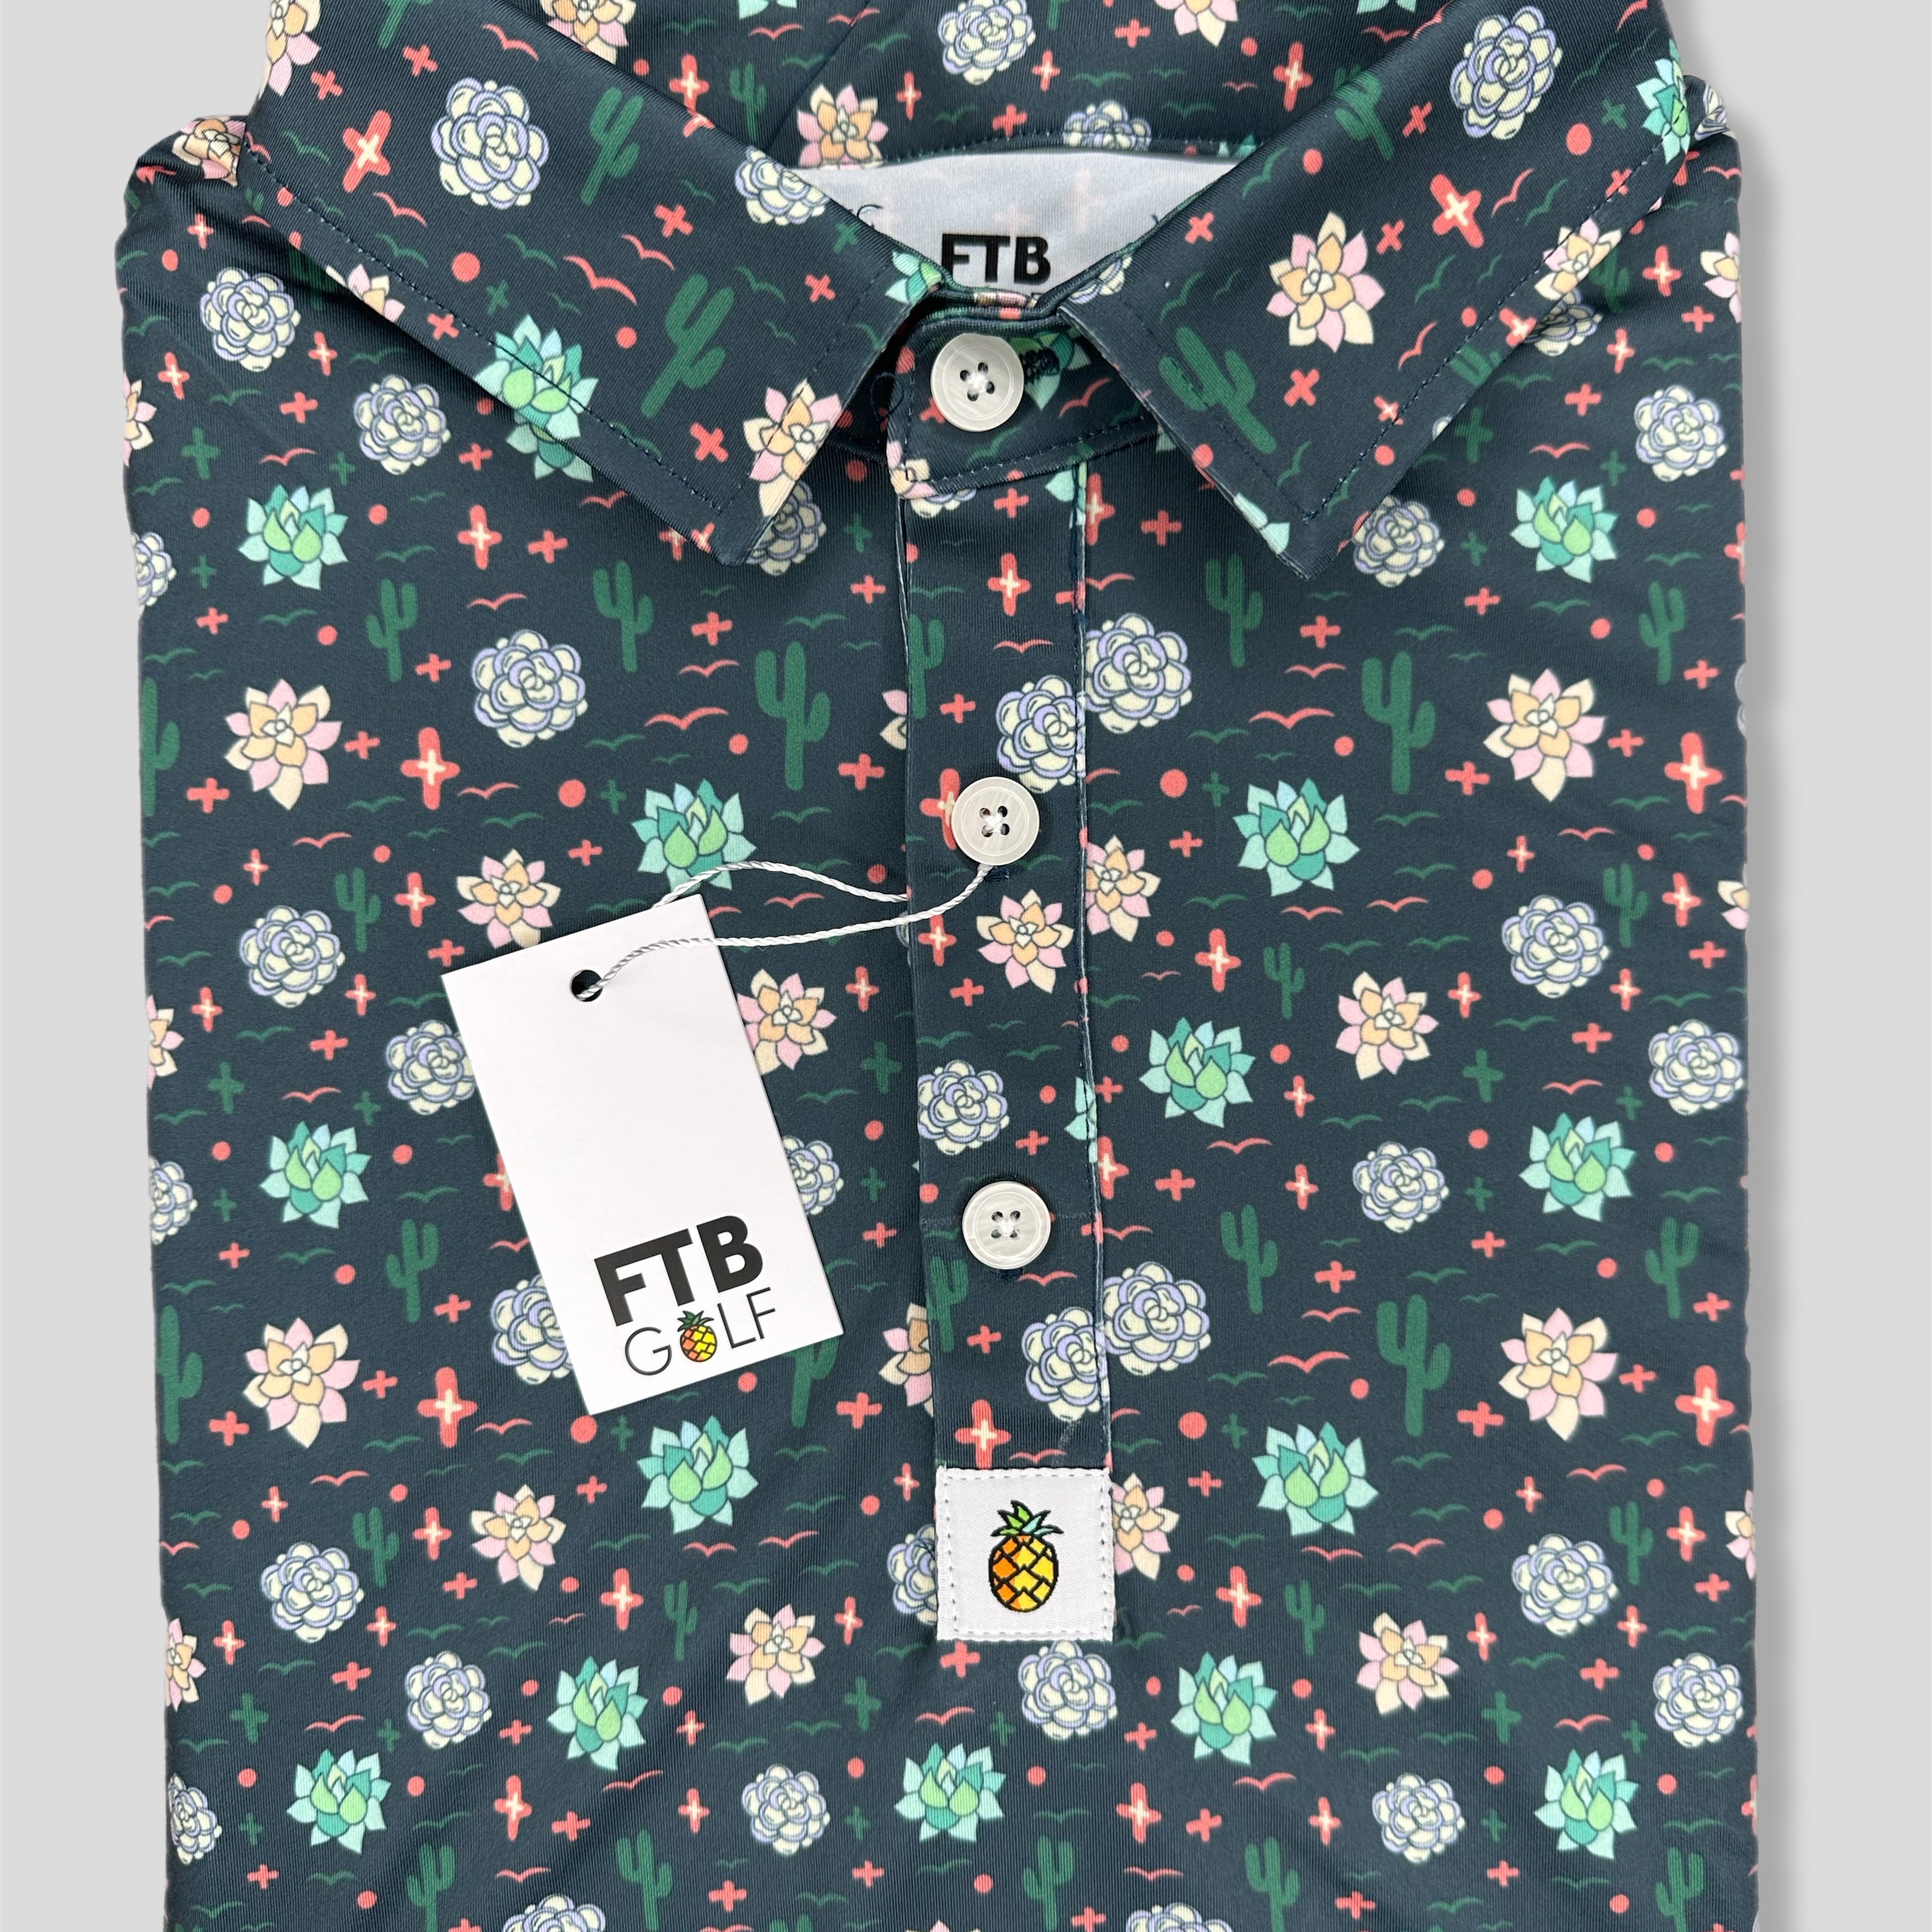 For the birds desert cactus theme patterned golf polo